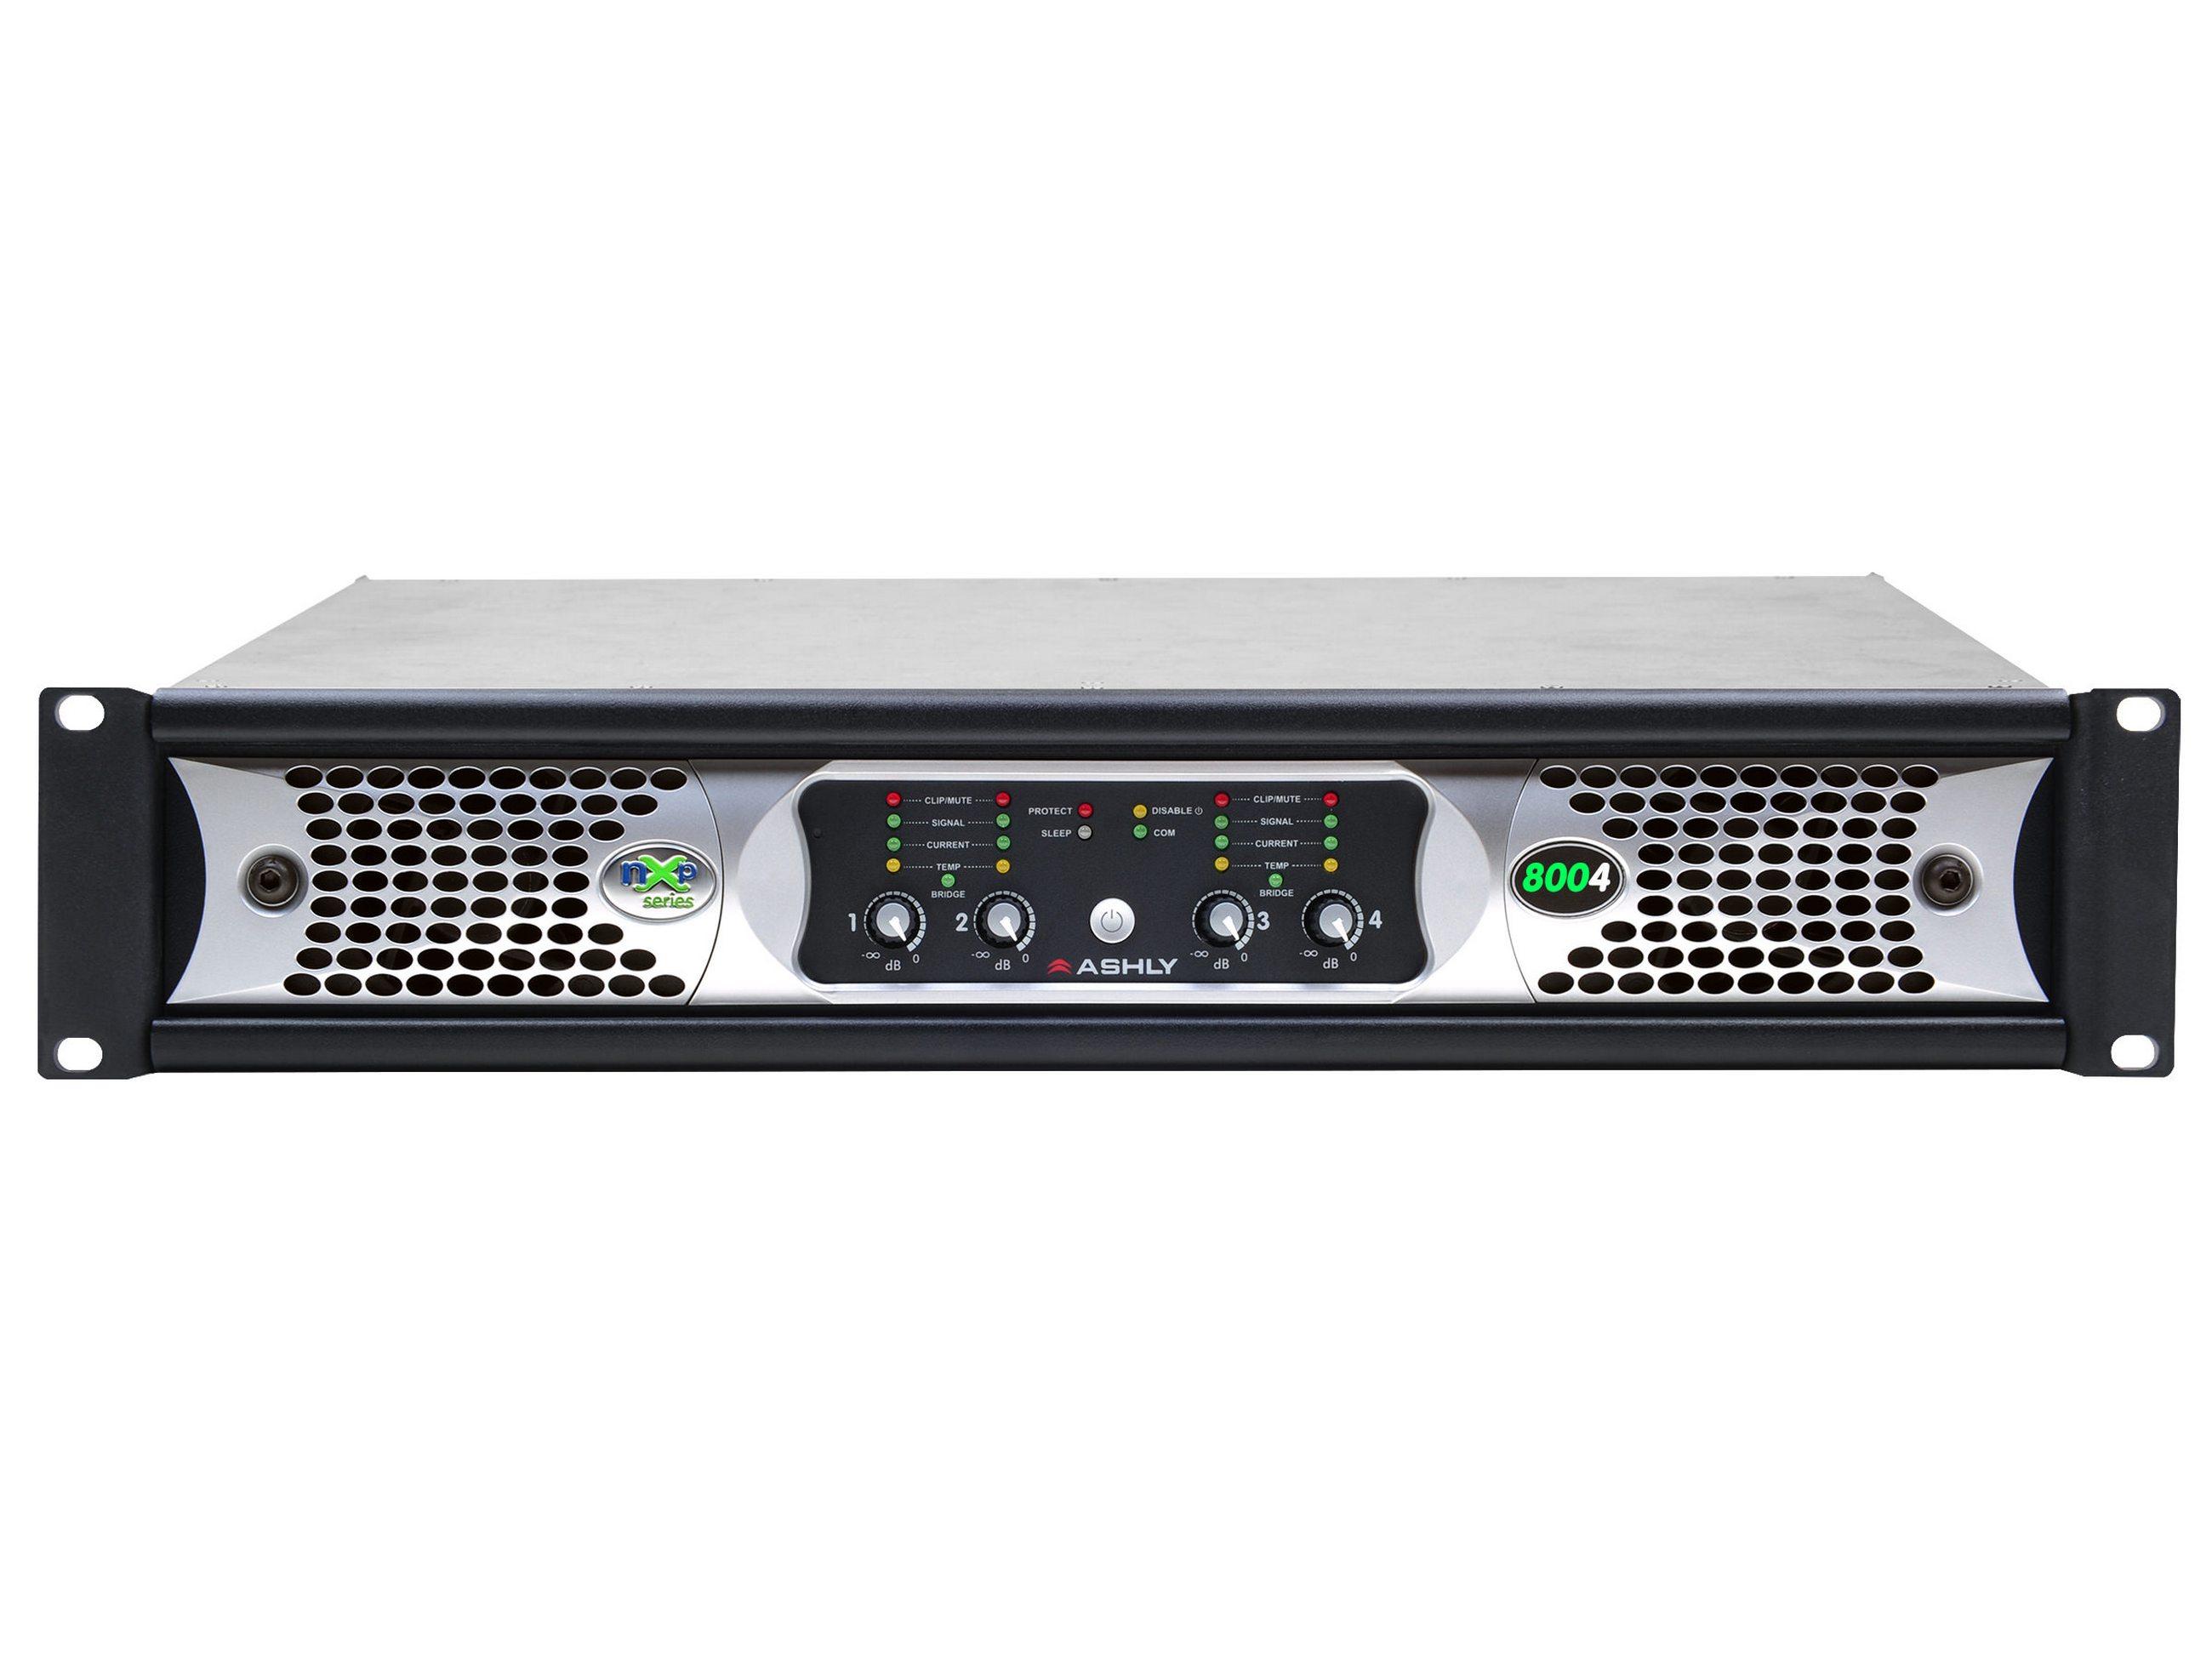 nXp8004 Network Power Amplifier 4 x 800 Watts/2 Ohms with Protea DSP by Ashly